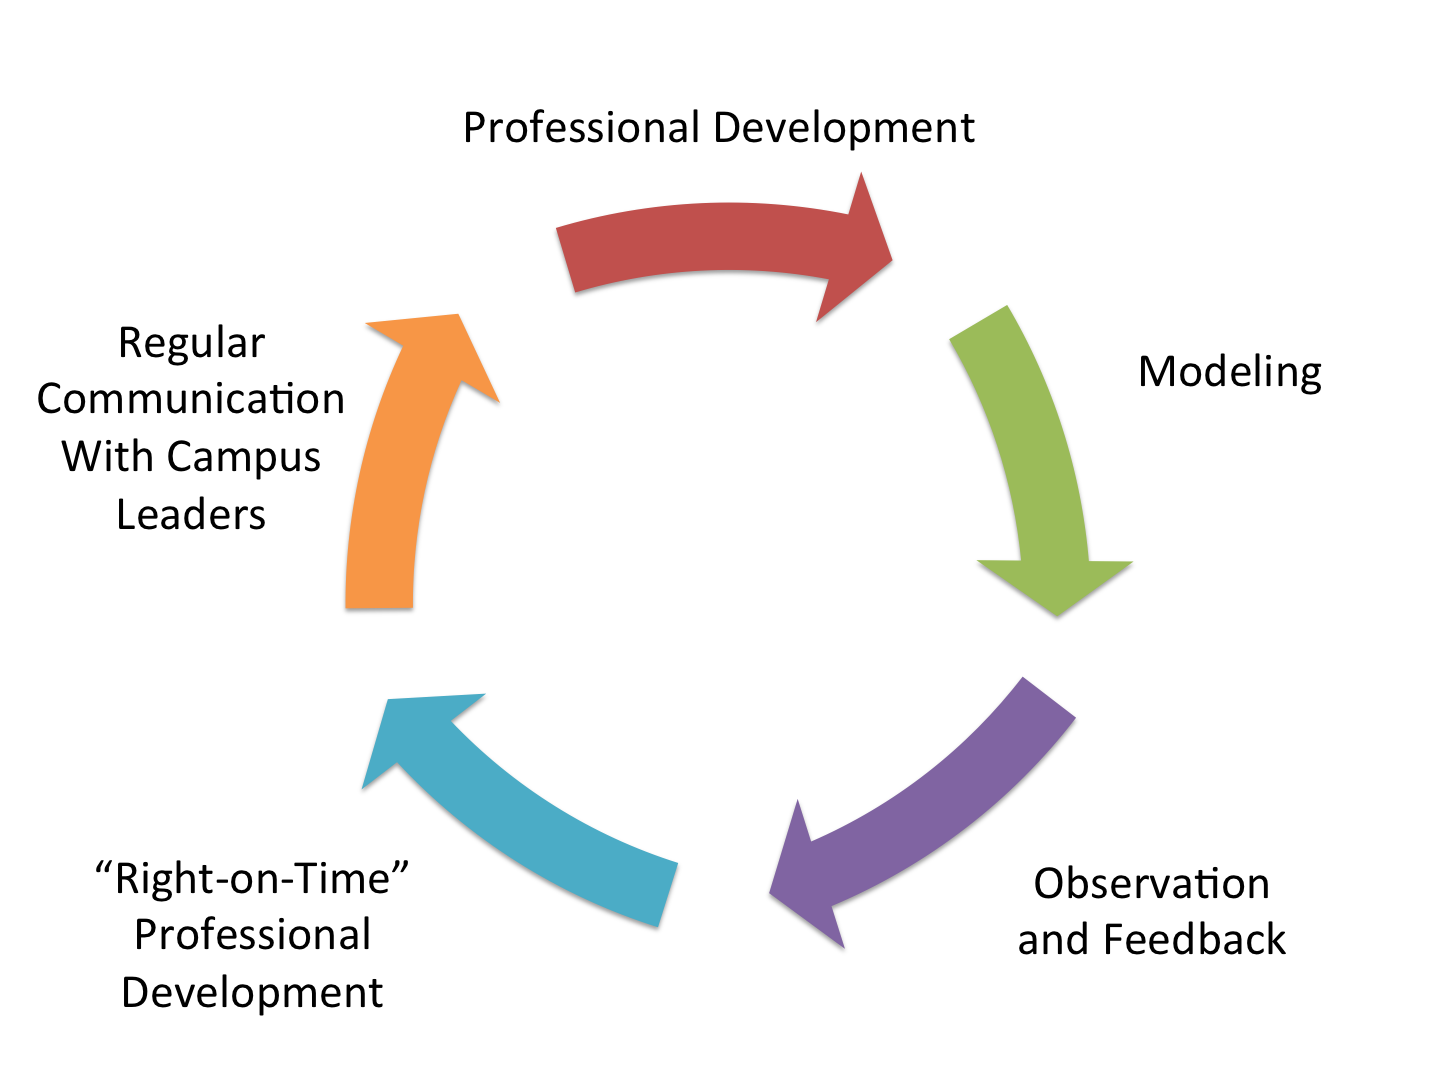 Circle made of colorful arrows, surrounded by words.  The words, moving in a clockwise direction and starting at the top, are 'Professional Development', 'Modeling', 'Observation and Feedback', 'Right-on-Time Professional Development', and 'Regular Communciation with Campus Leaders'